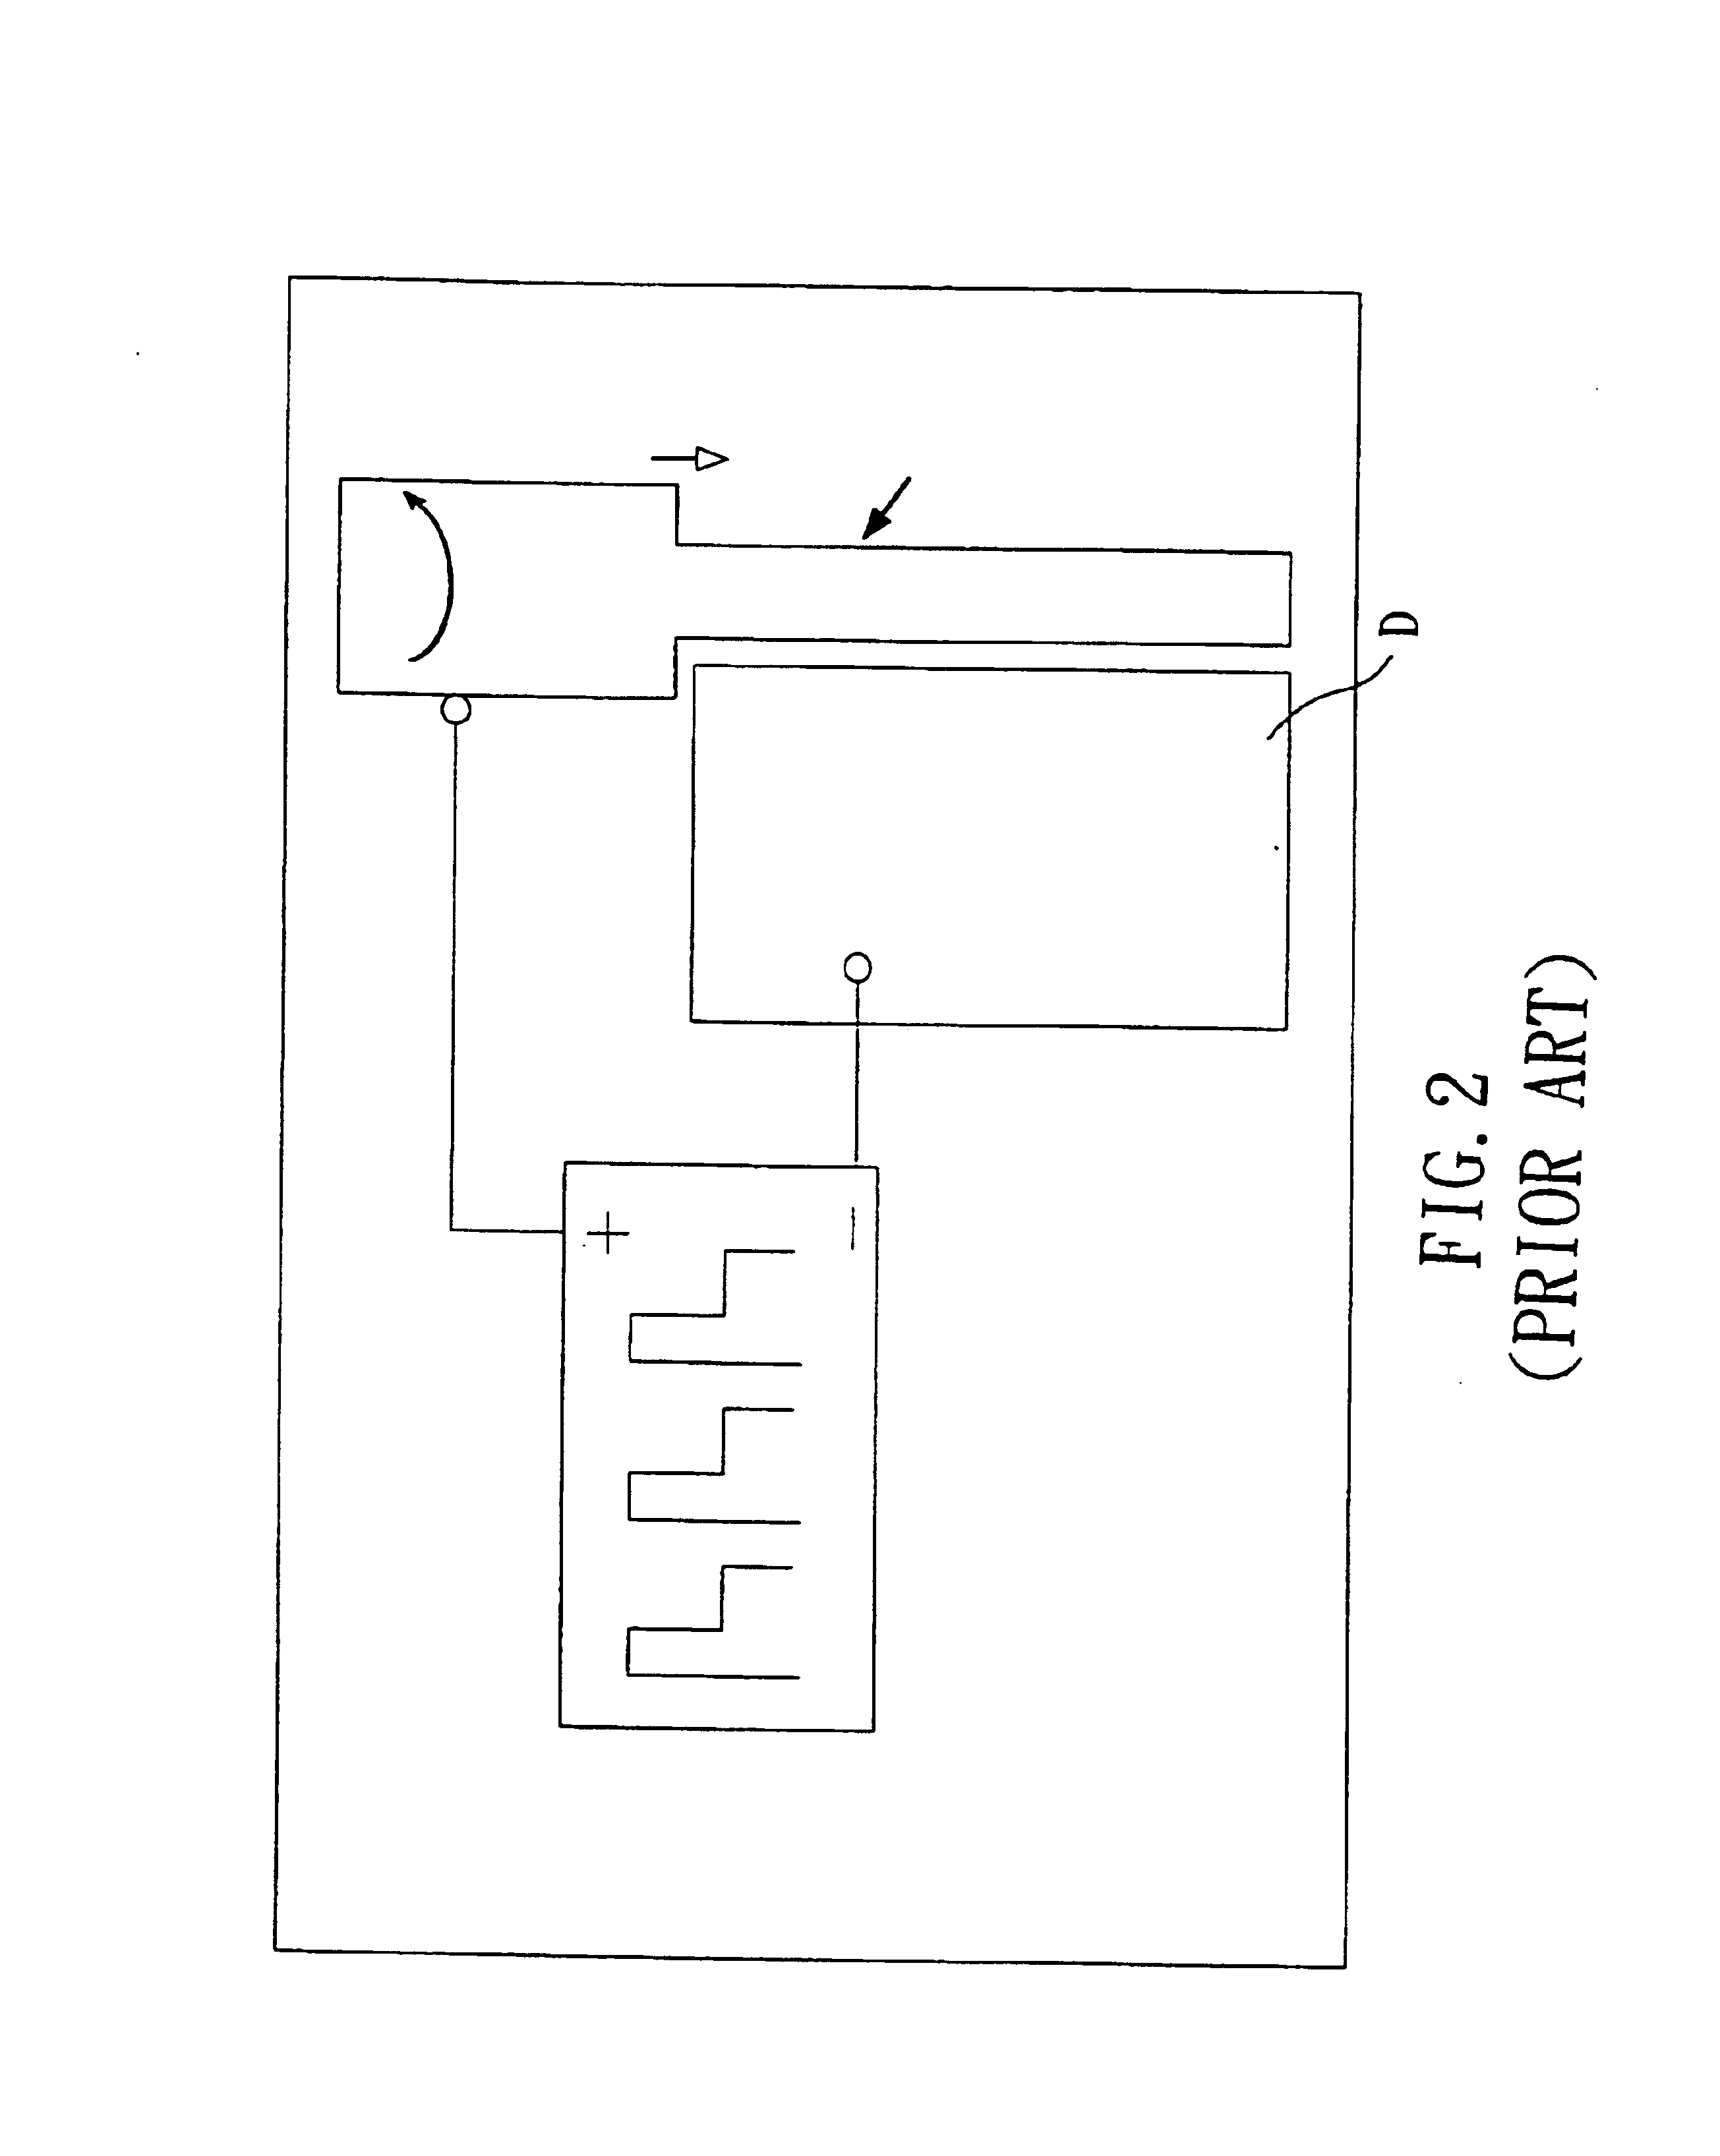 Microelectrode machining device